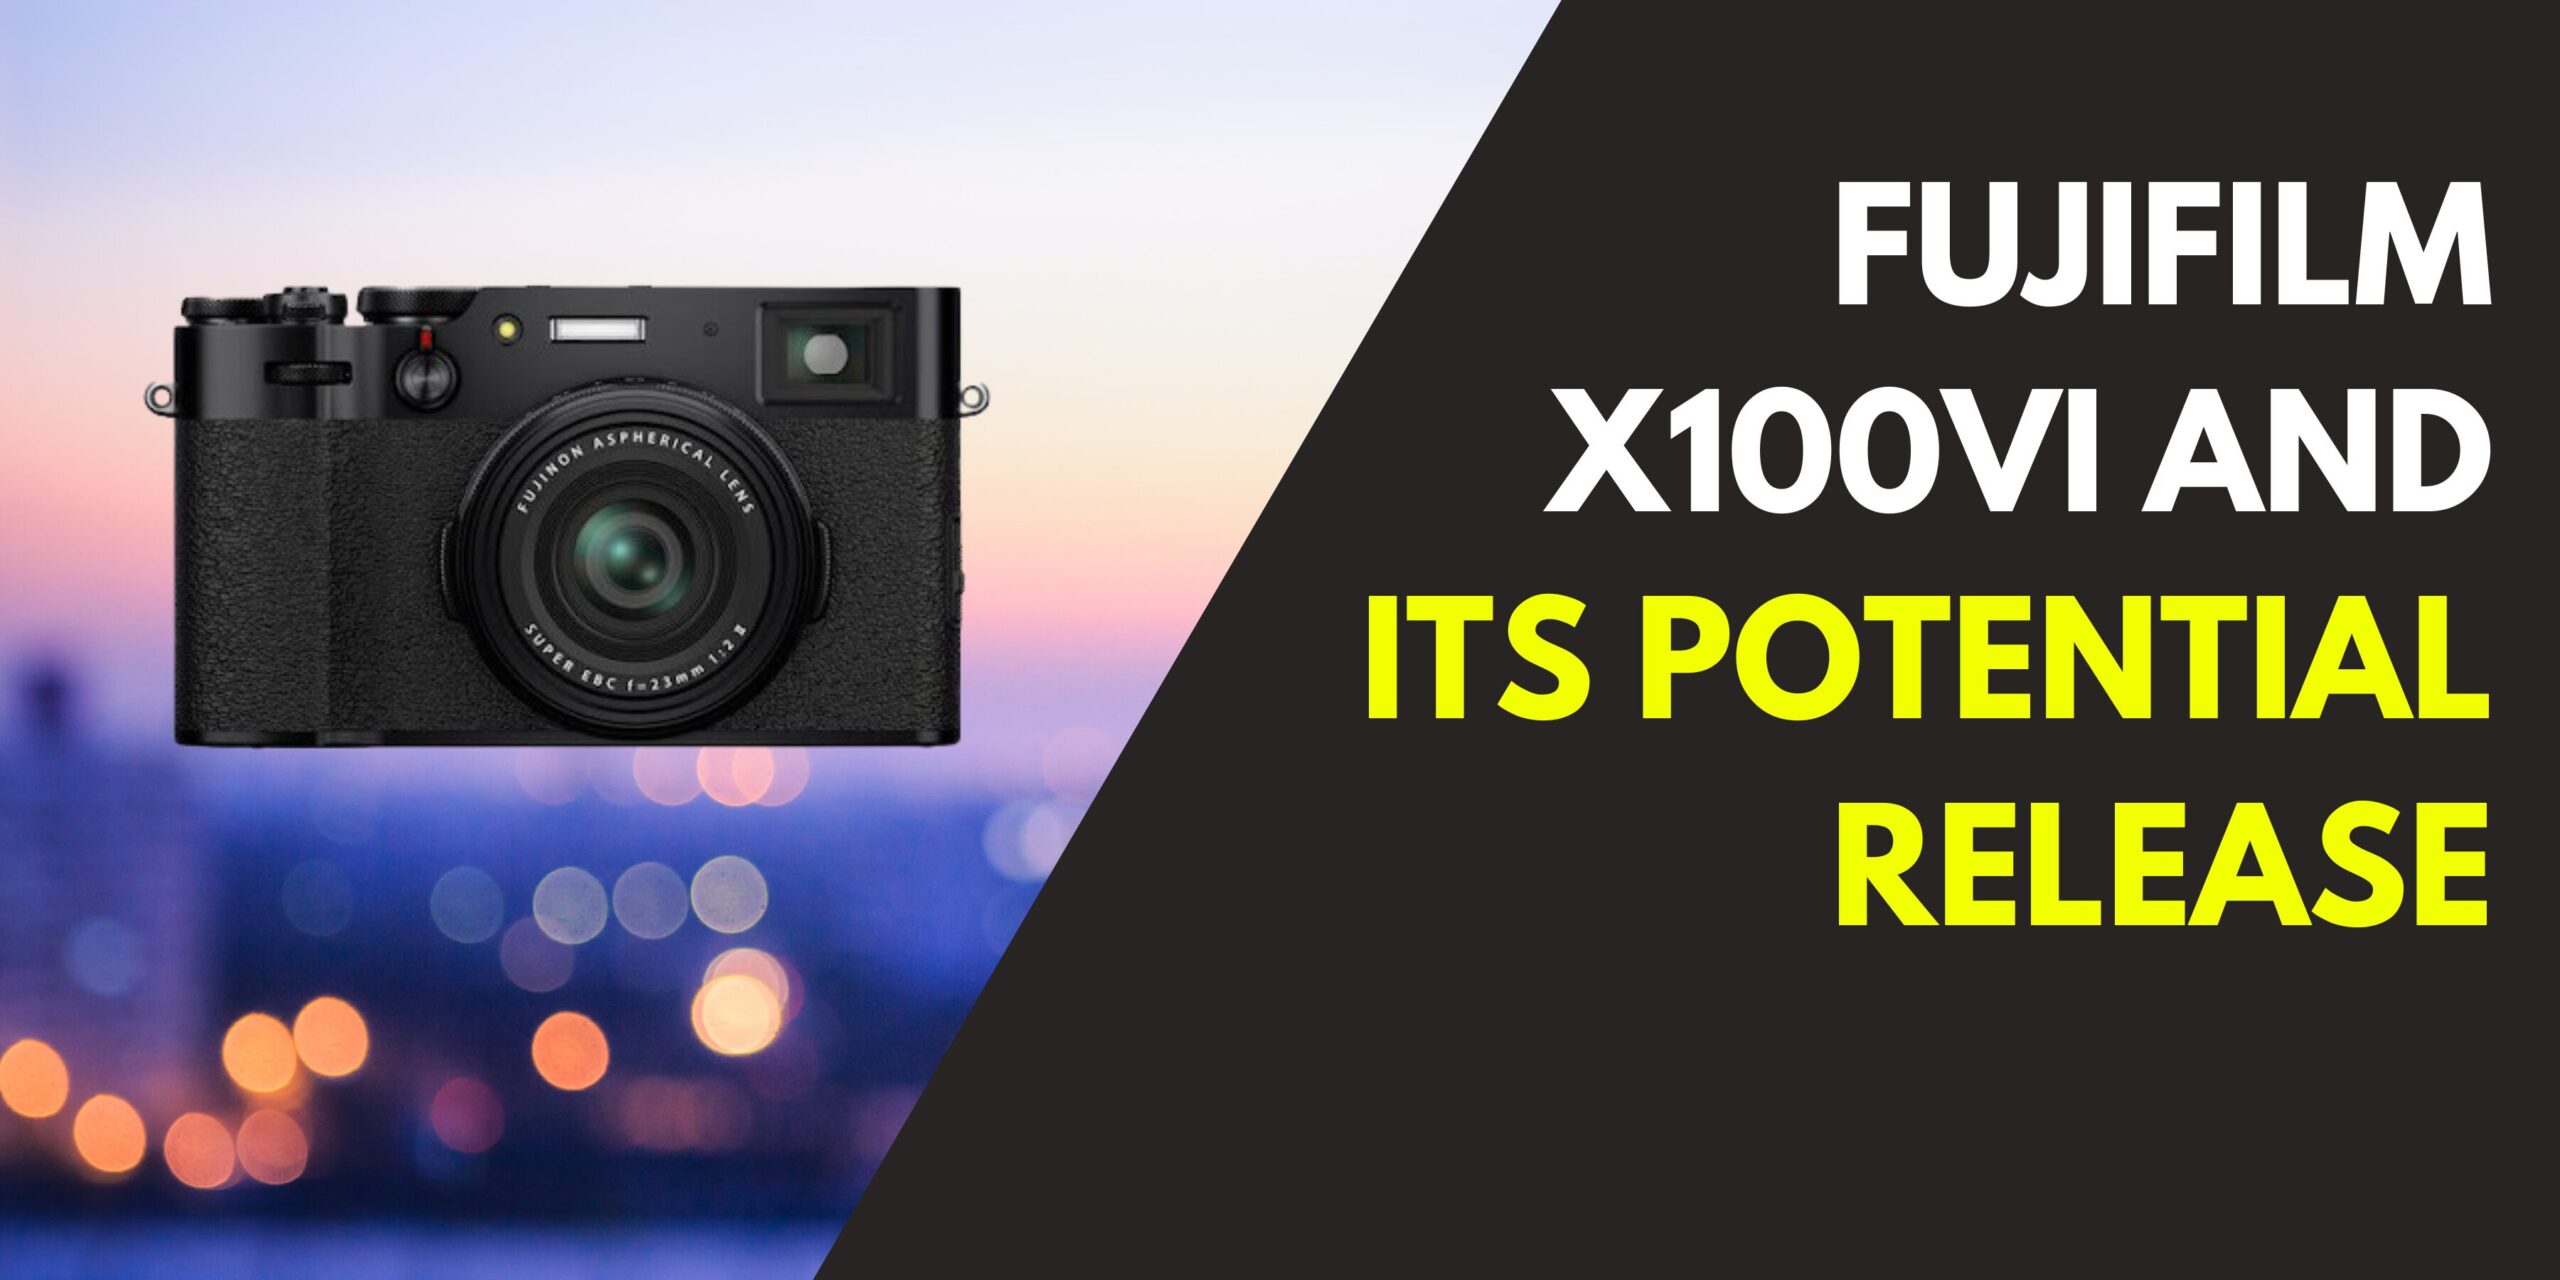 Much Awaited Fujifilm X100VI and Its Potential Release CamerasGuy